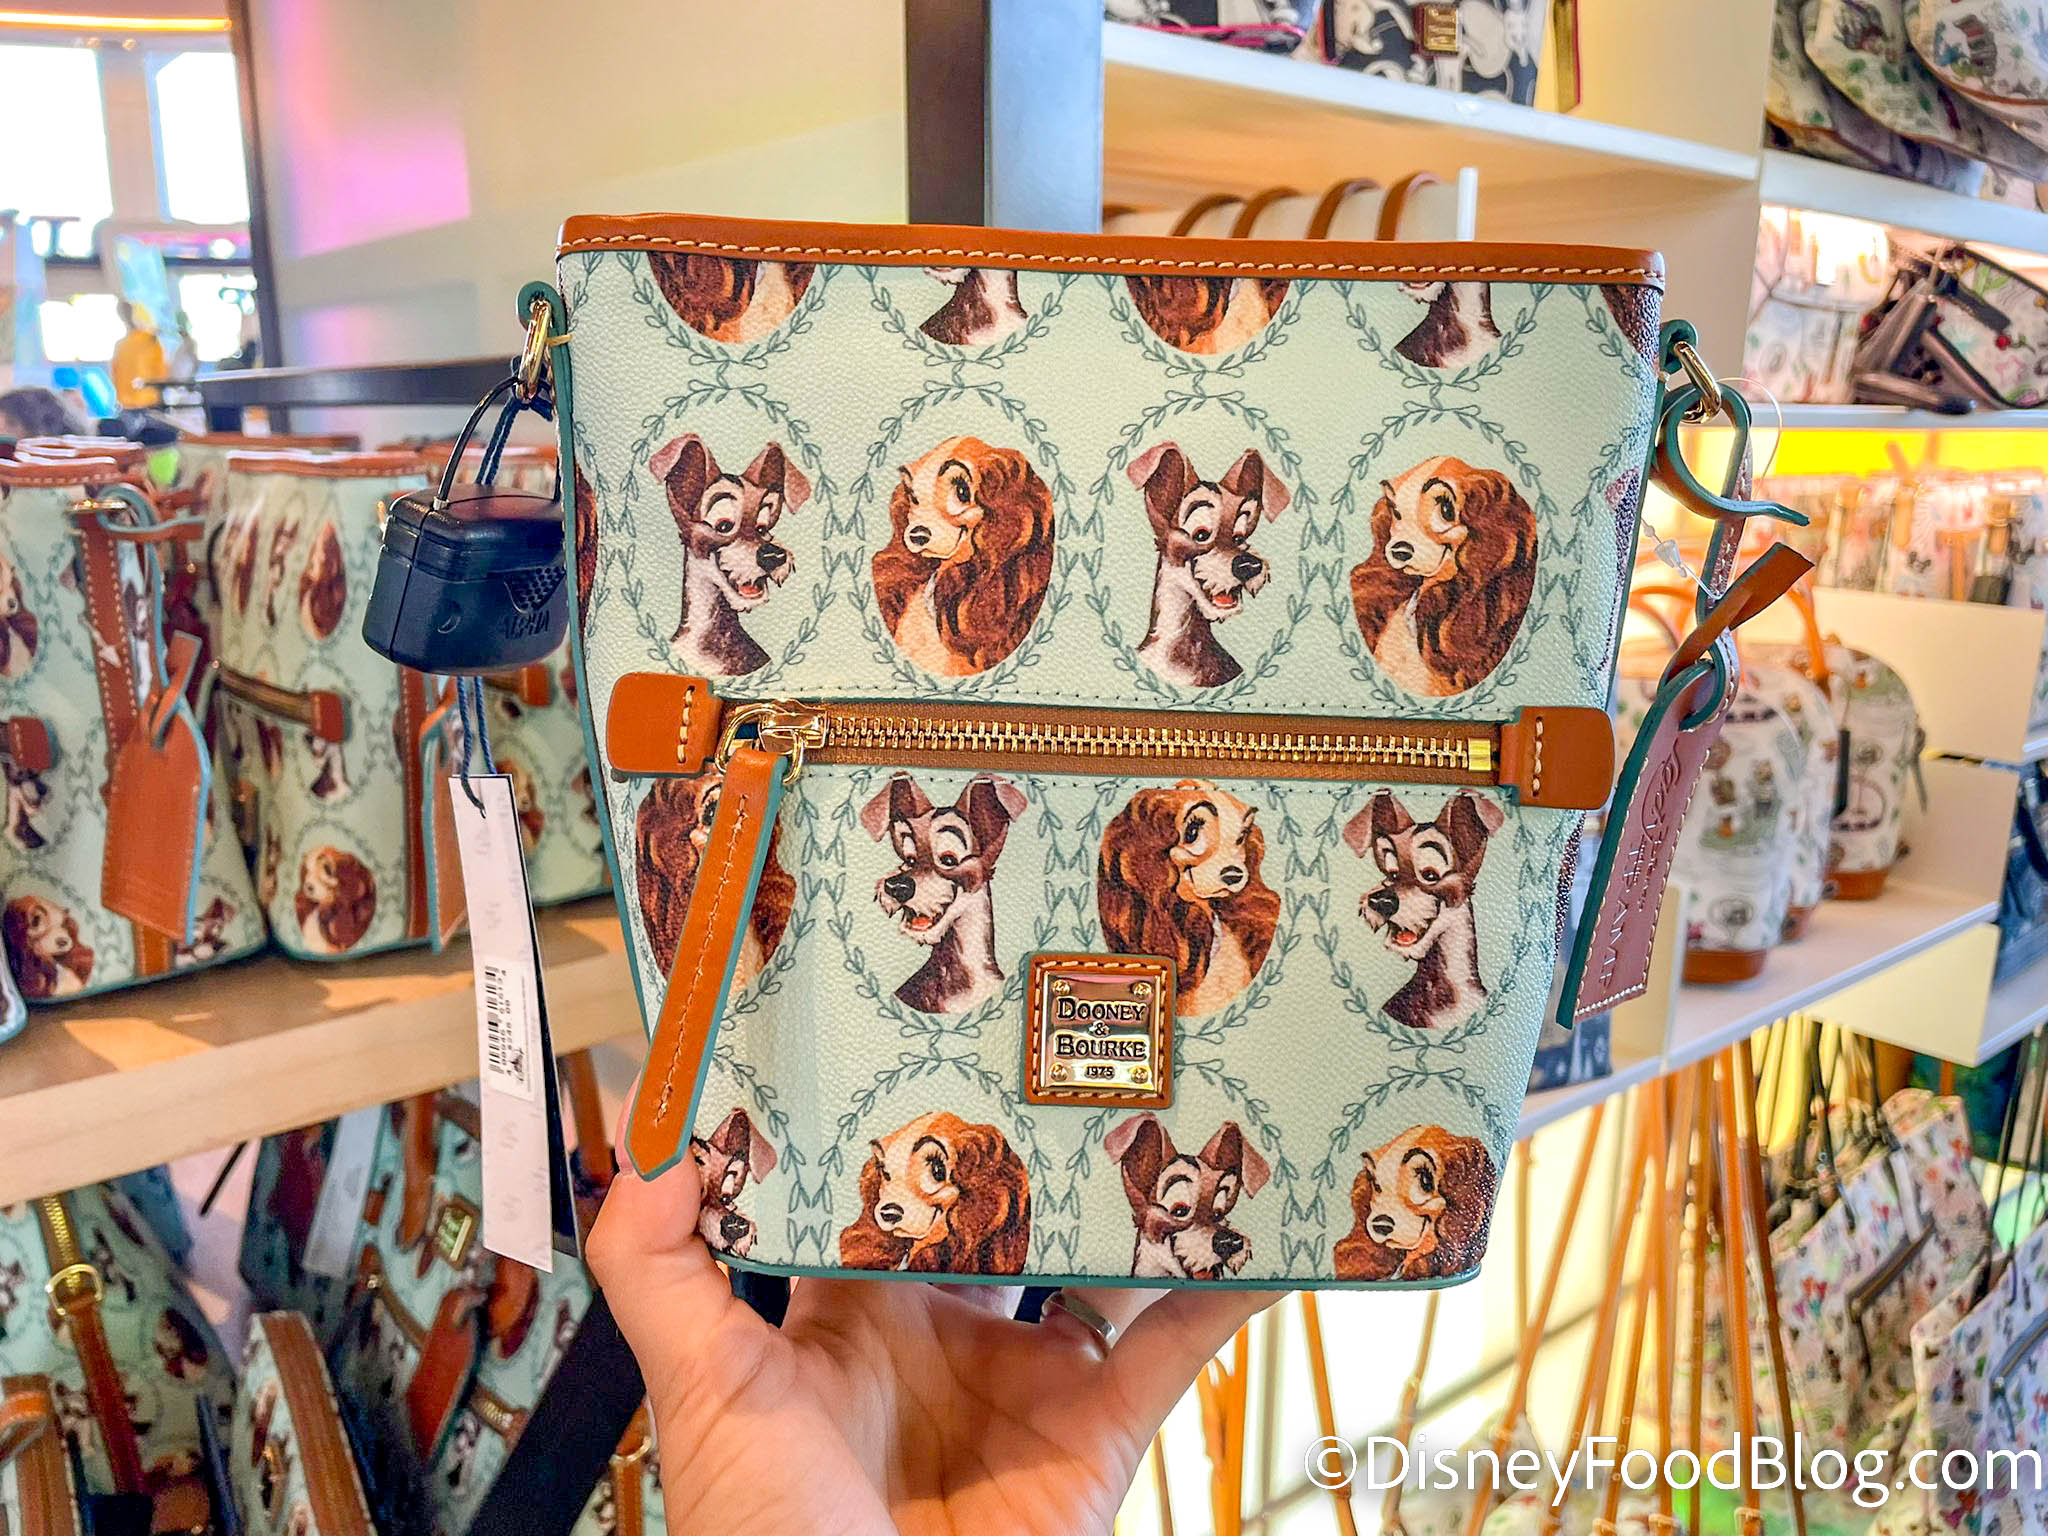 DOONEY & BOURKE OUTLET -HANDBAGS SHOPPING UP to 50% OFF January 1, 2022 